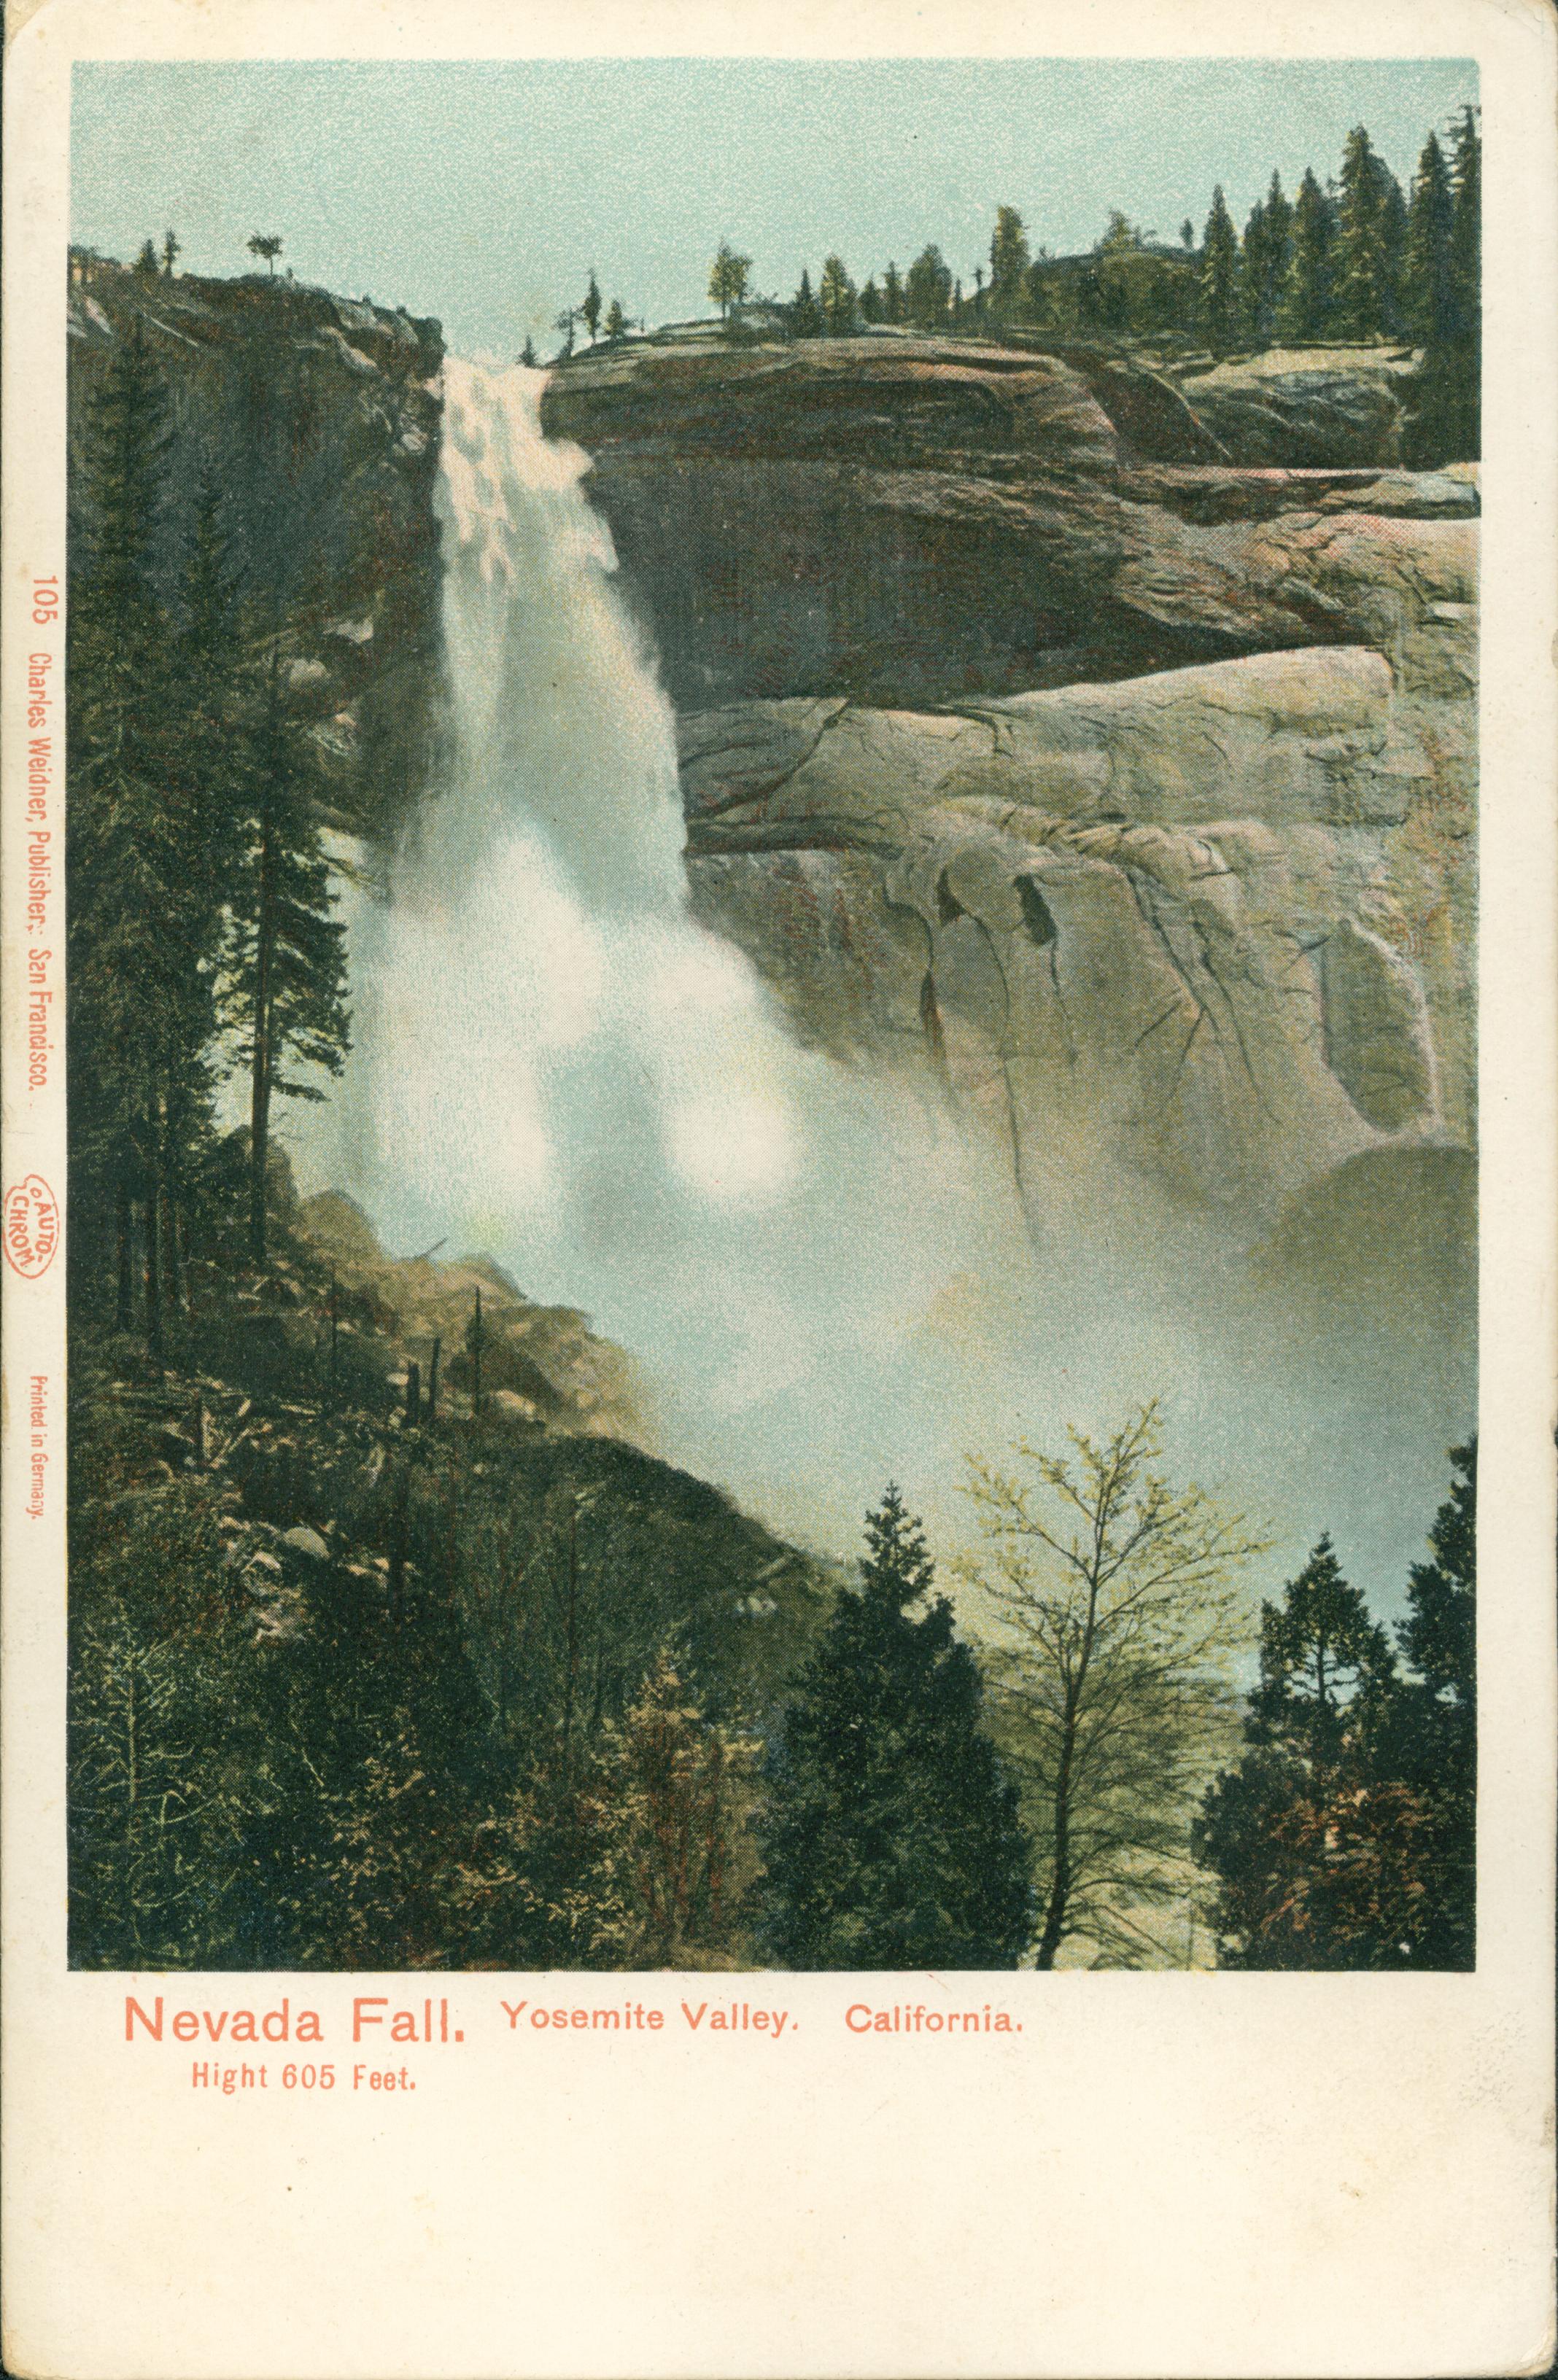 Shows a view of Nevada Falls